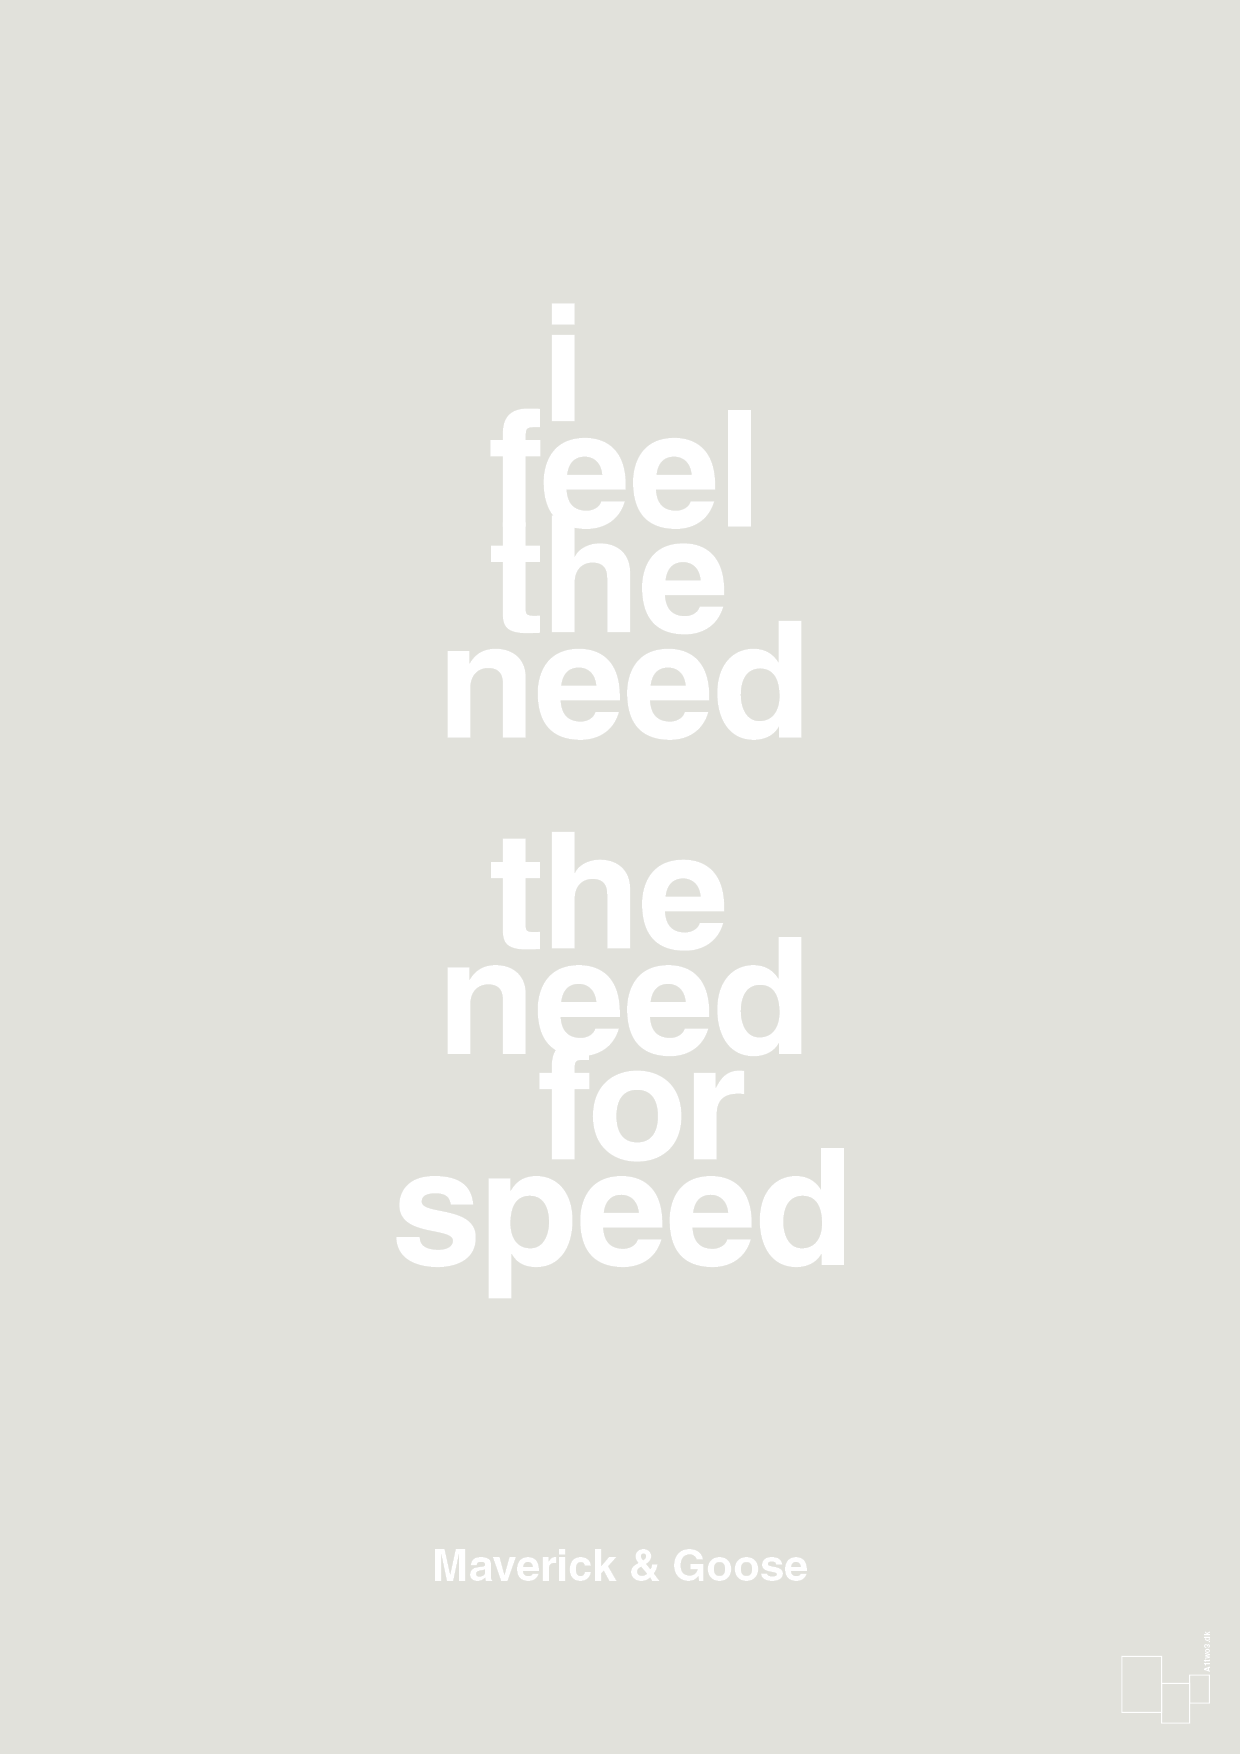 i feel the need the need for speed - Plakat med Citater i Painters White